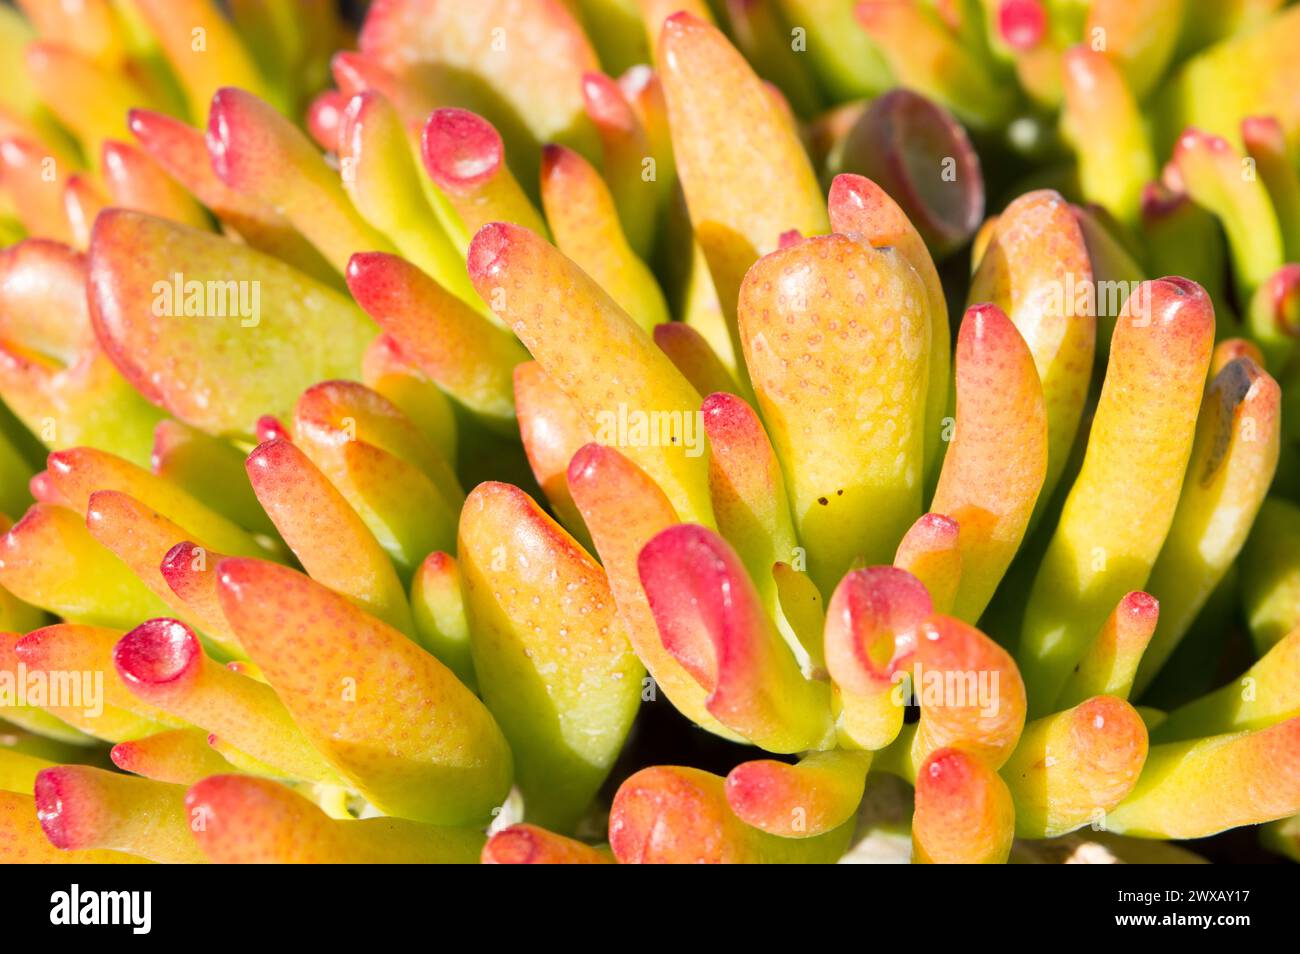 Crassula ovata gollum succulent outdoors with tubular, trumpet shaped leaves and red tops Stock Photo